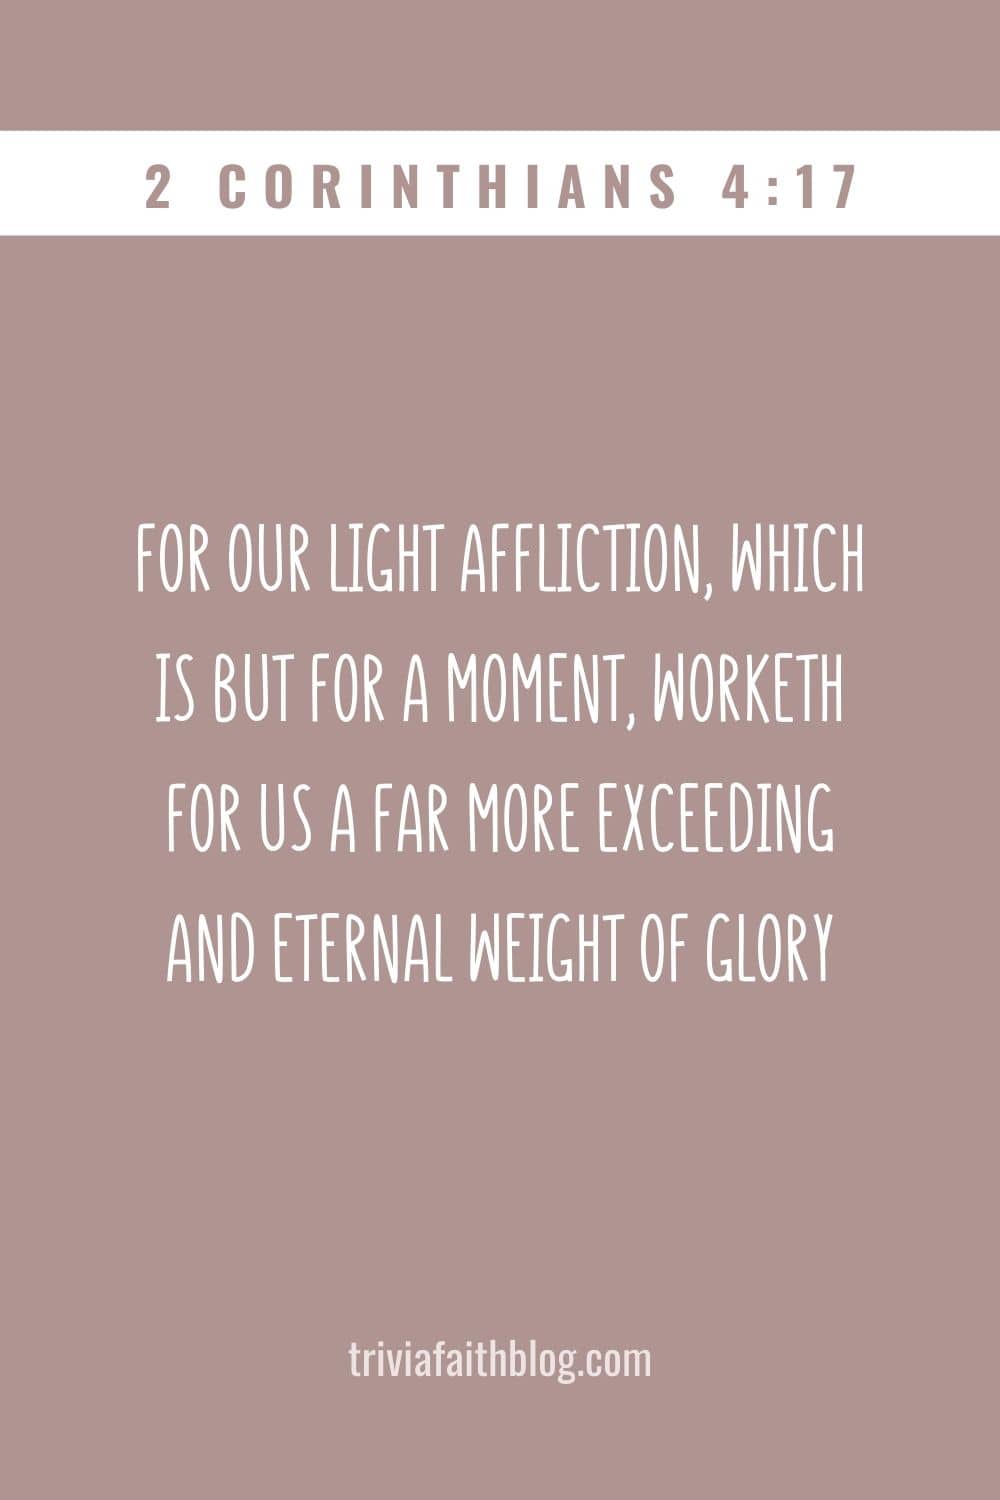 For our light affliction which is but for a moment worketh for us a far more exceeding and eternal weight of glory